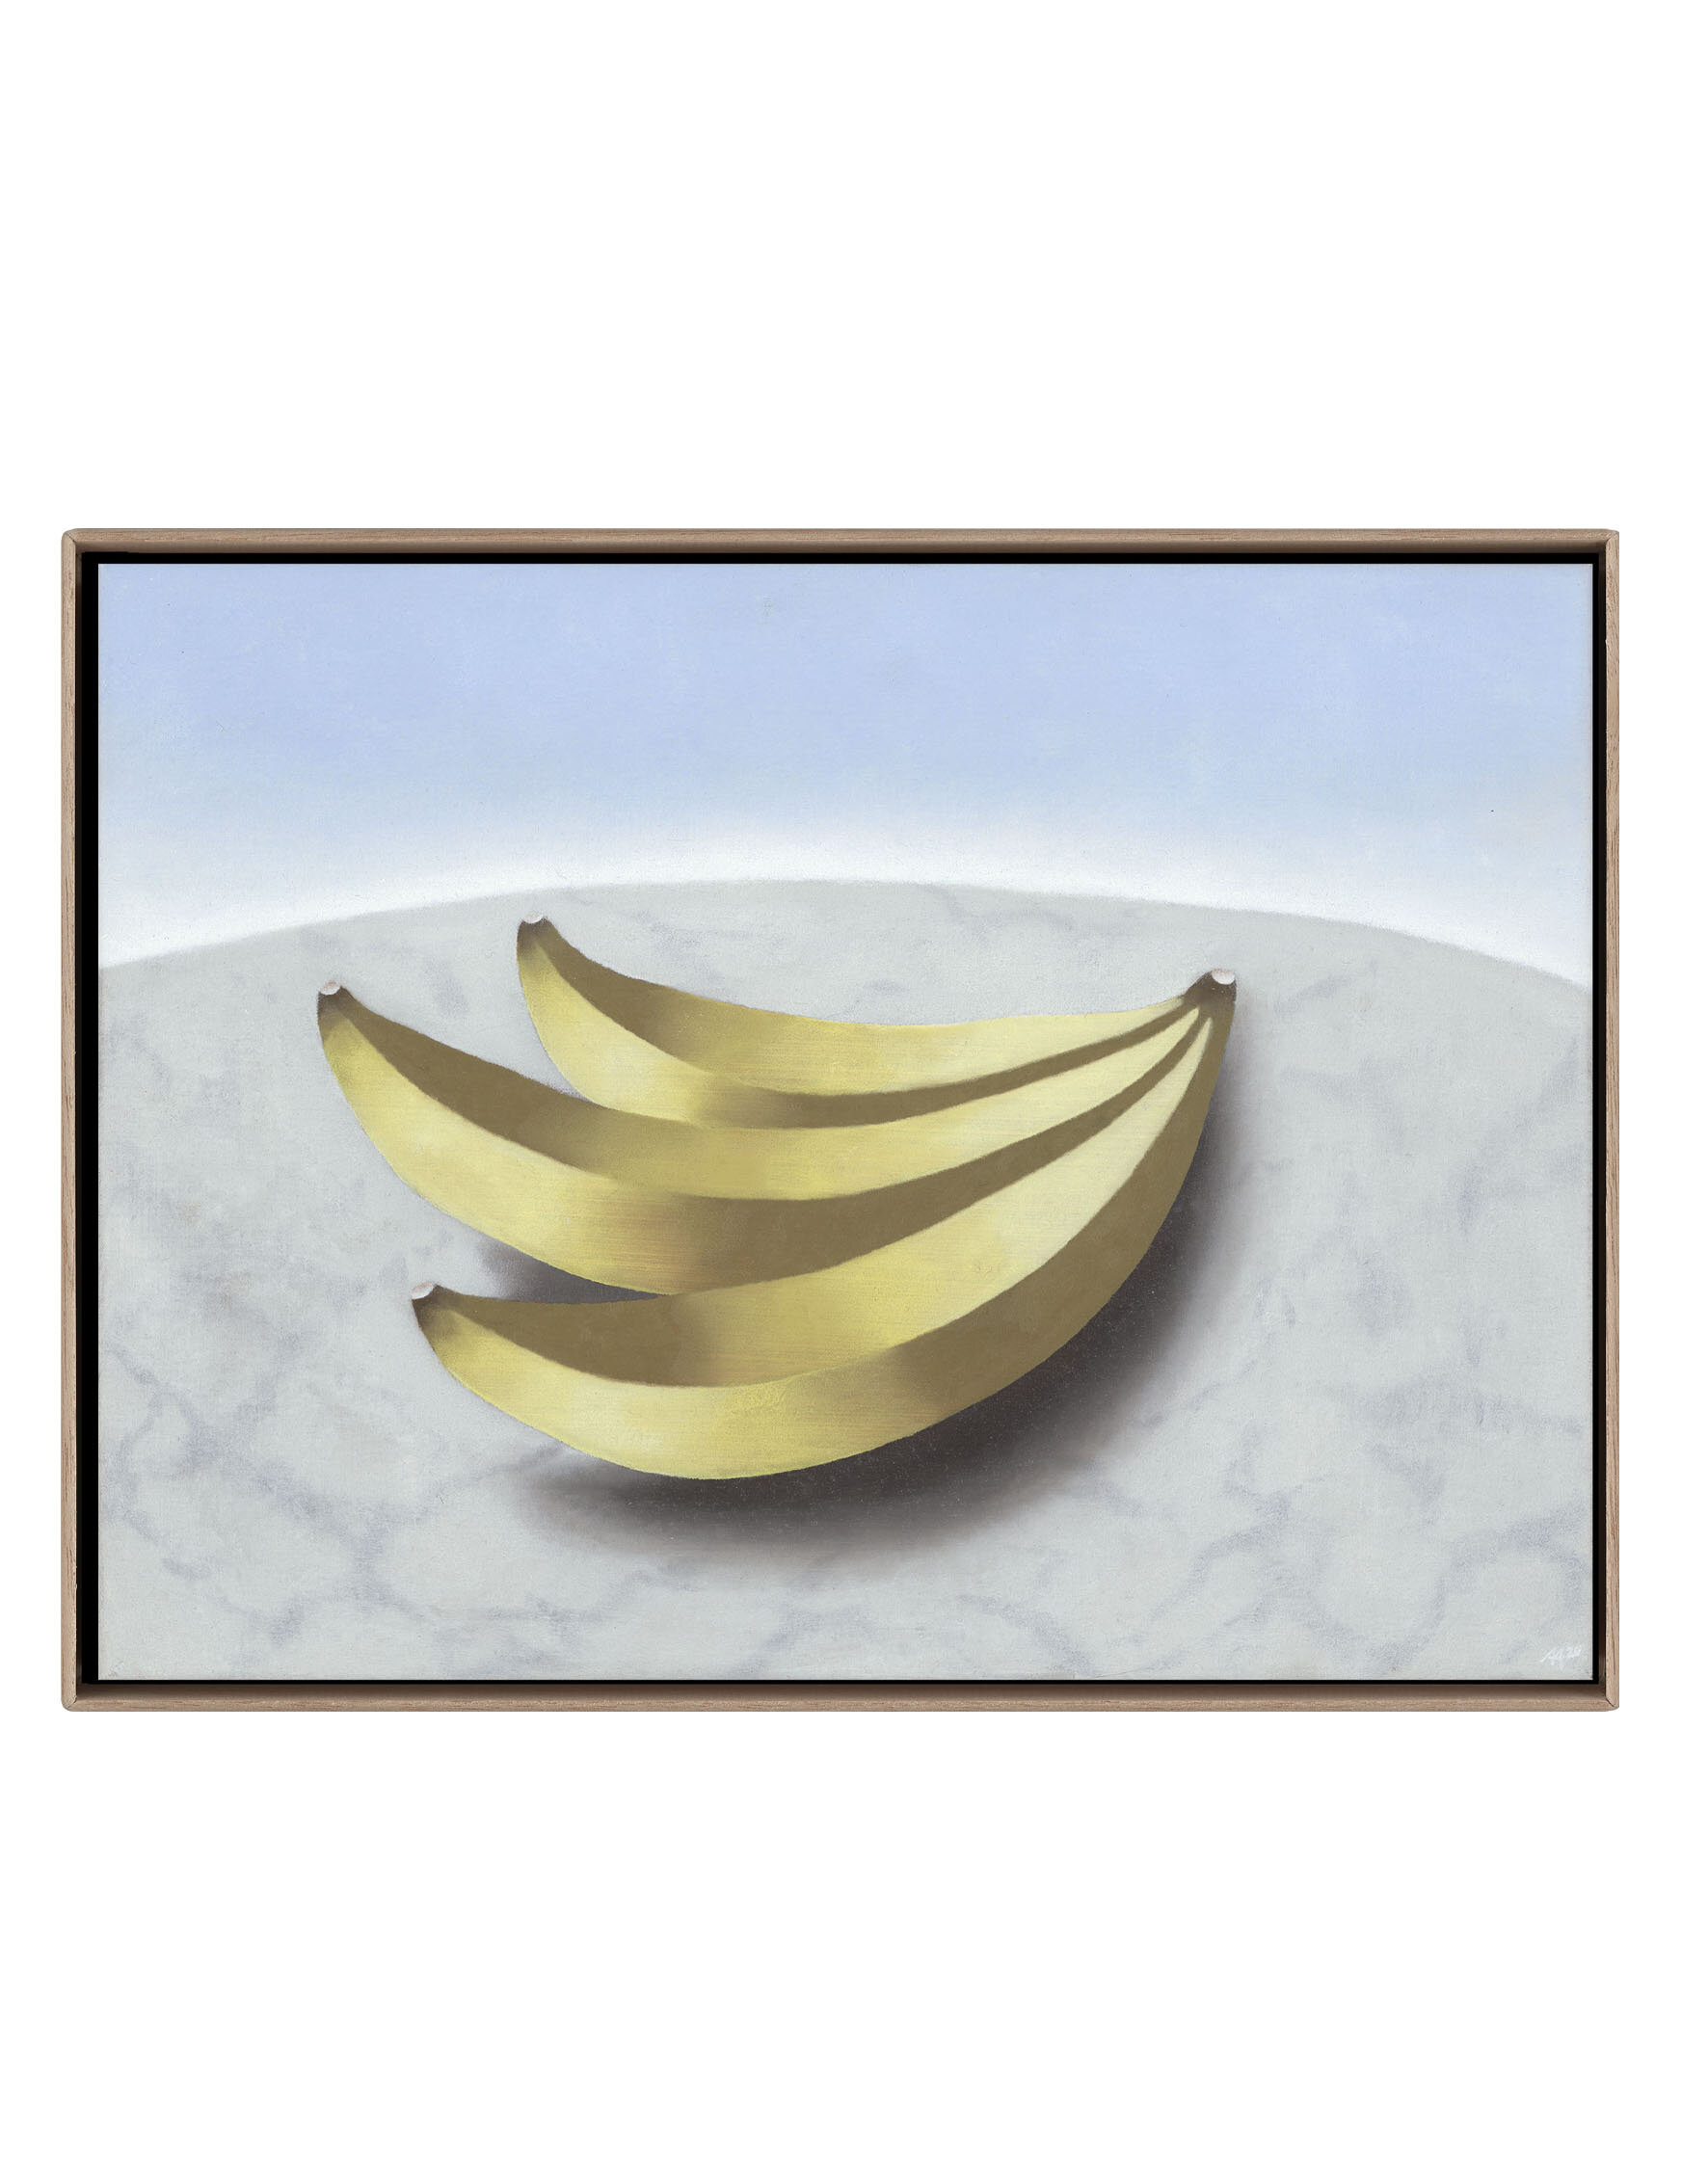 Title: Space Bananas